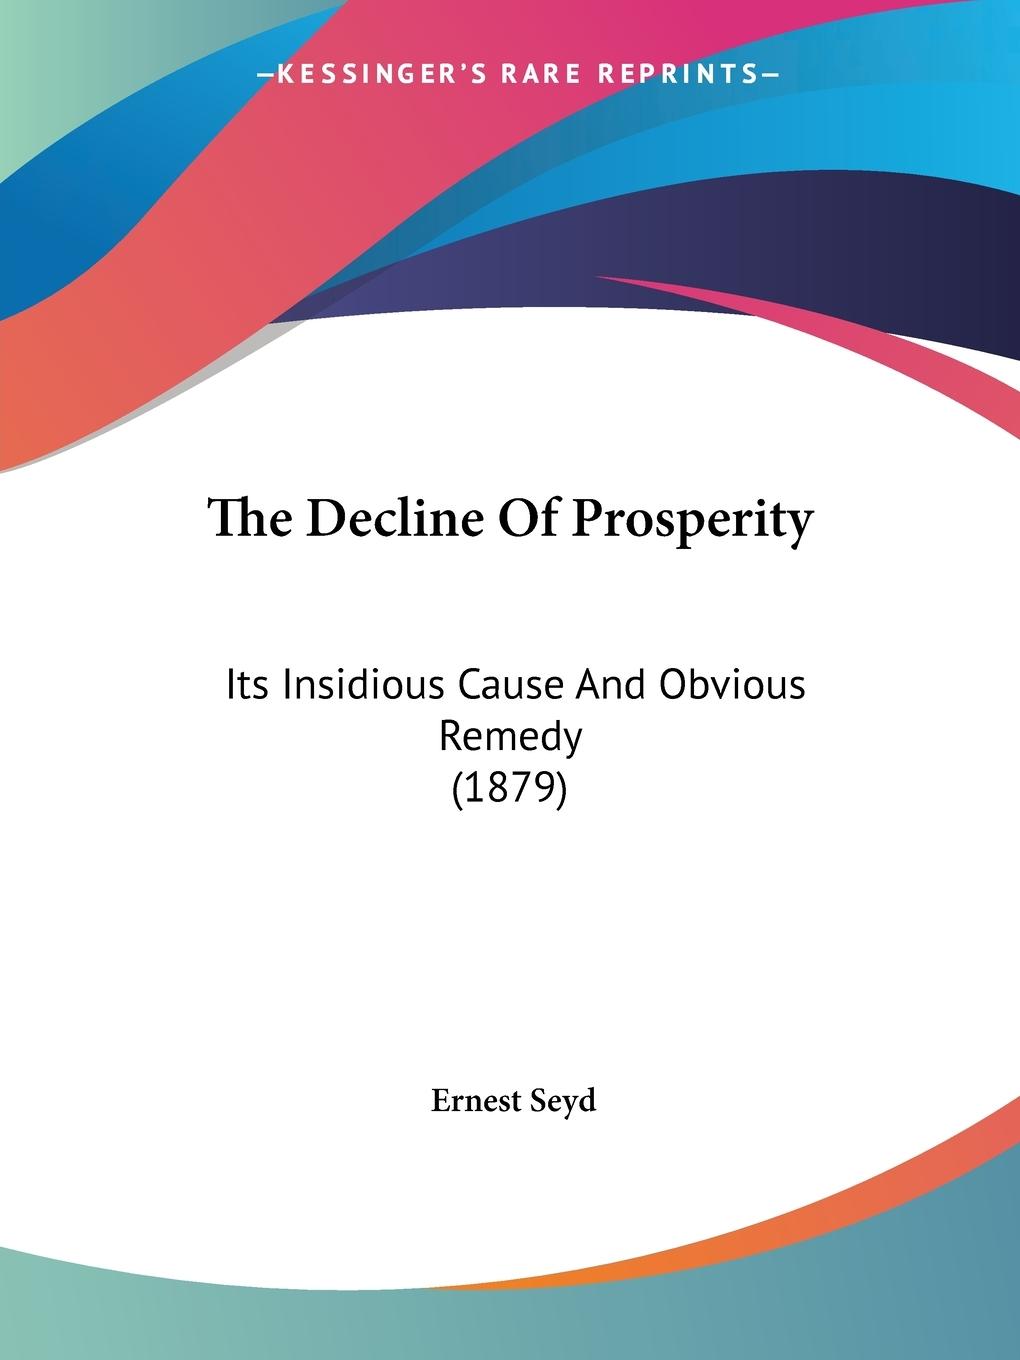 The Decline Of Prosperity - Seyd, Ernest